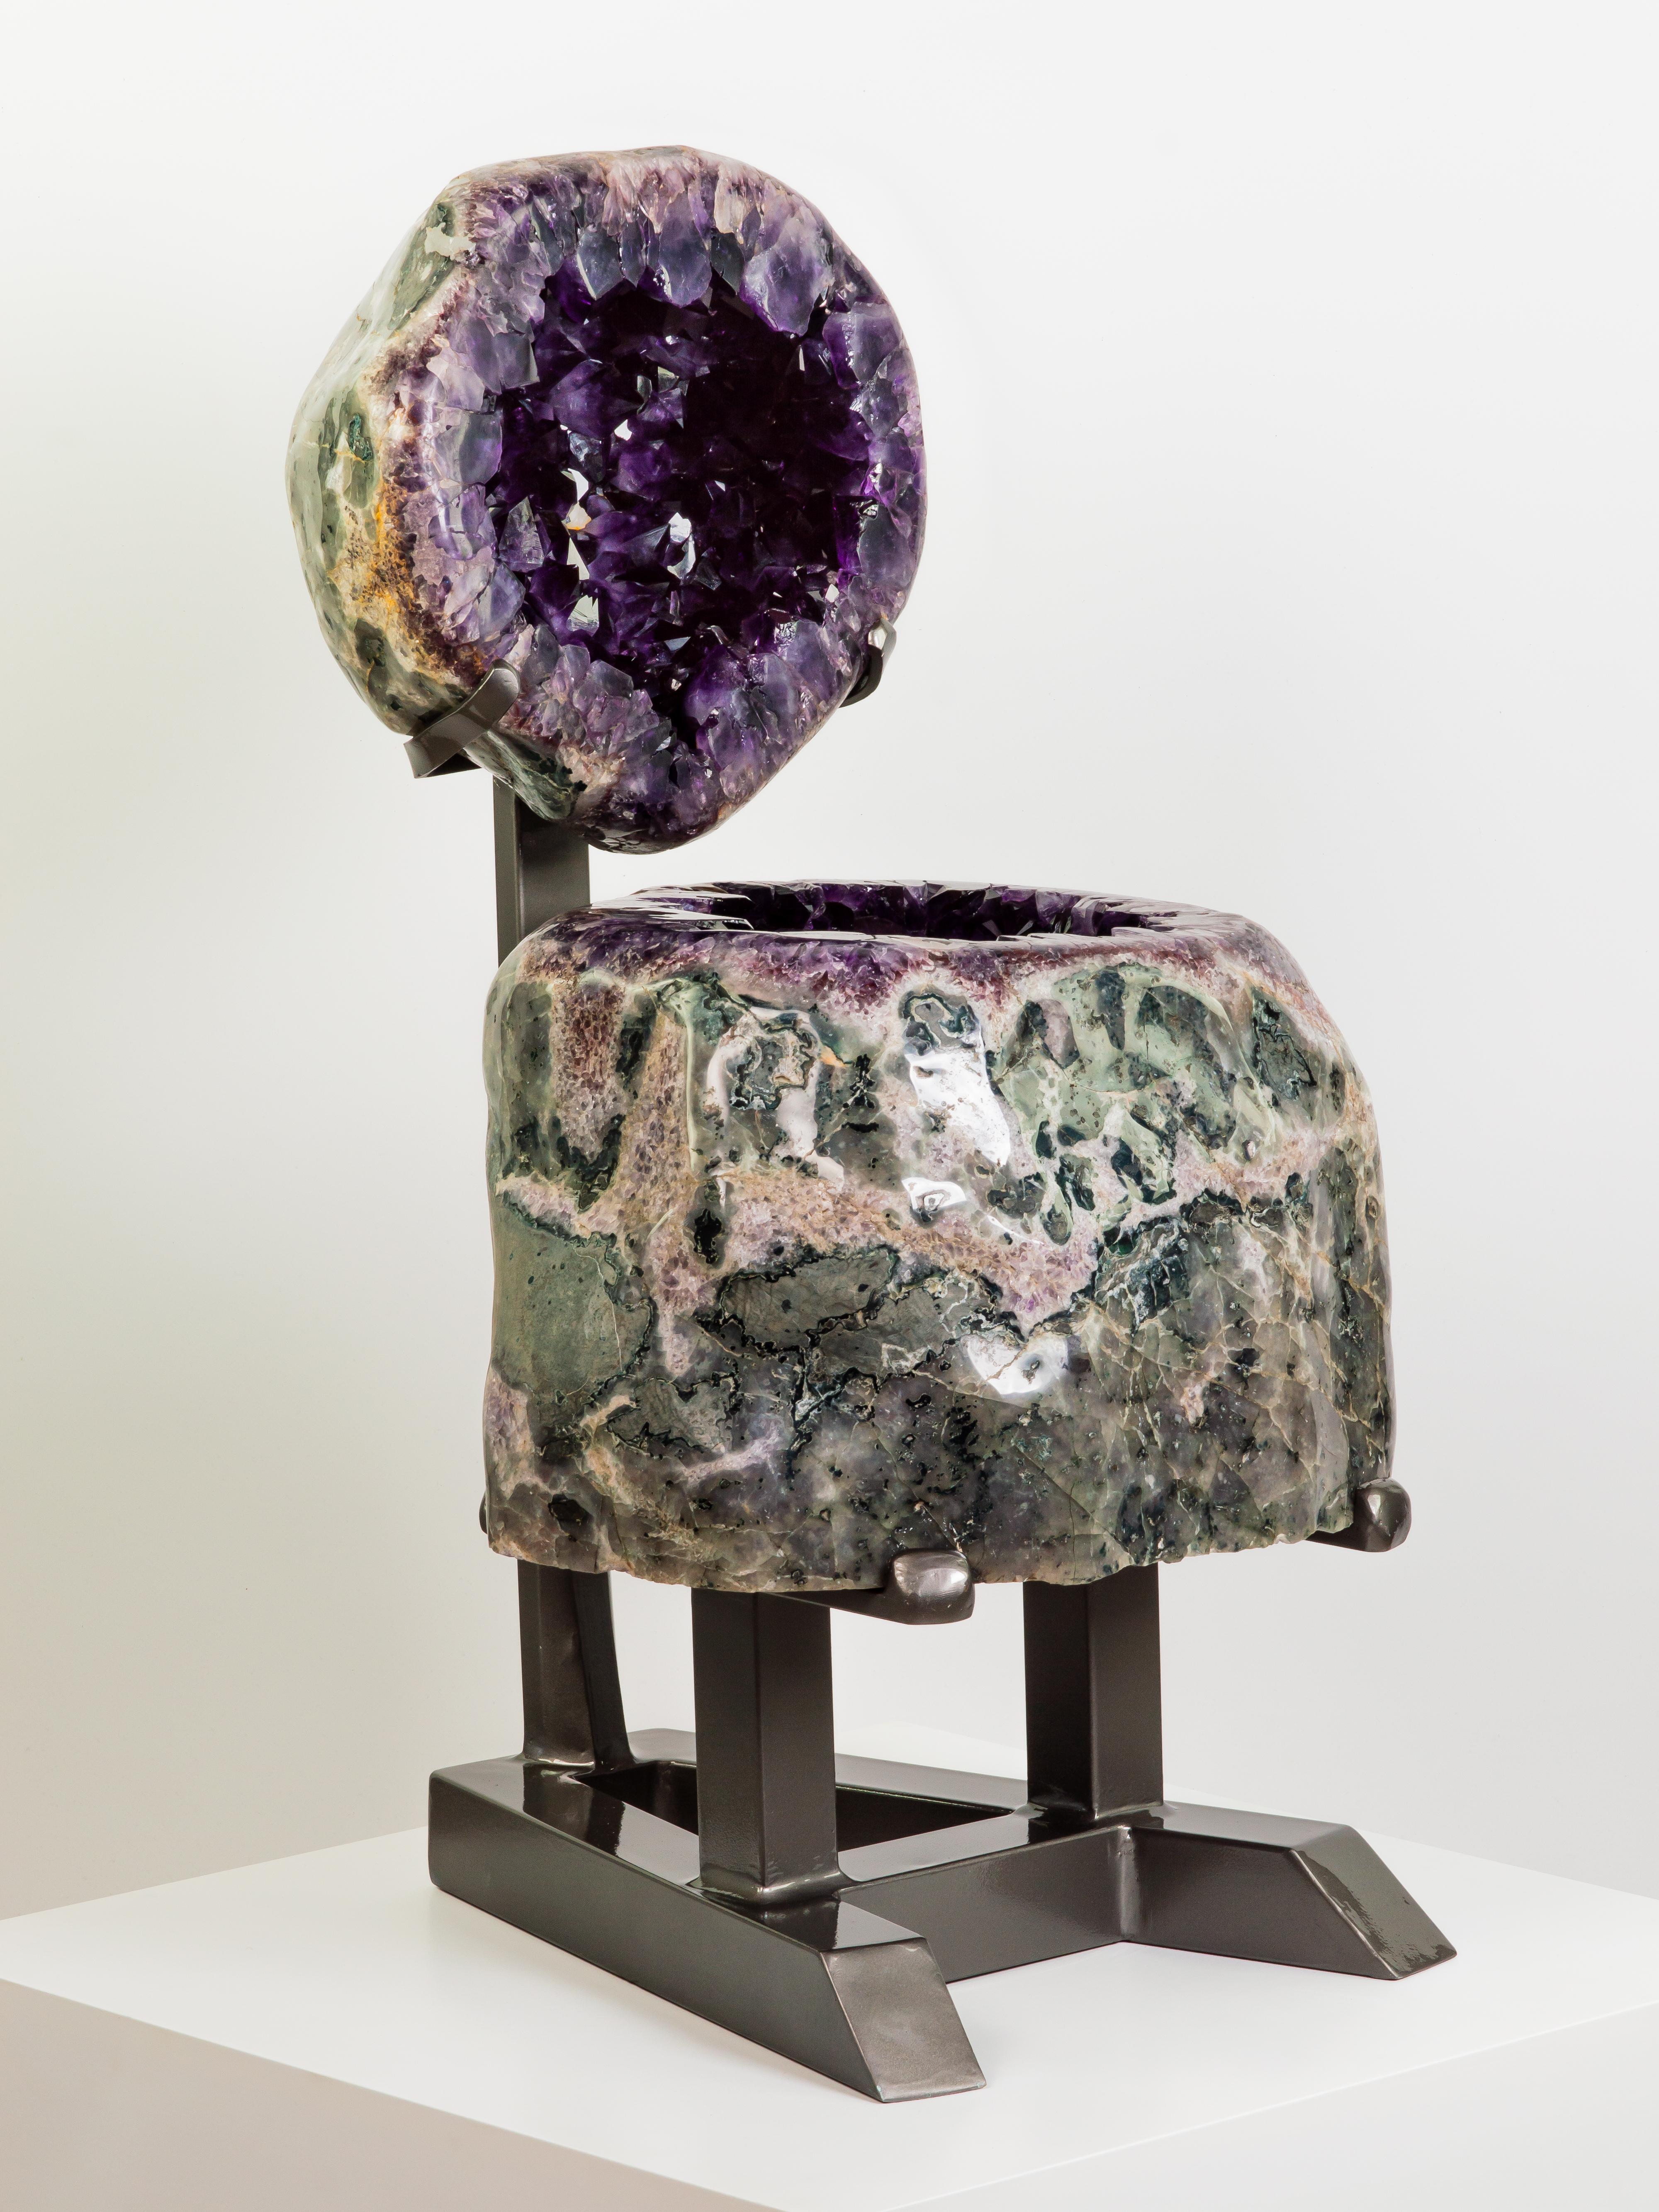 Agate Amethyst “Jewellery Box” Formation For Sale